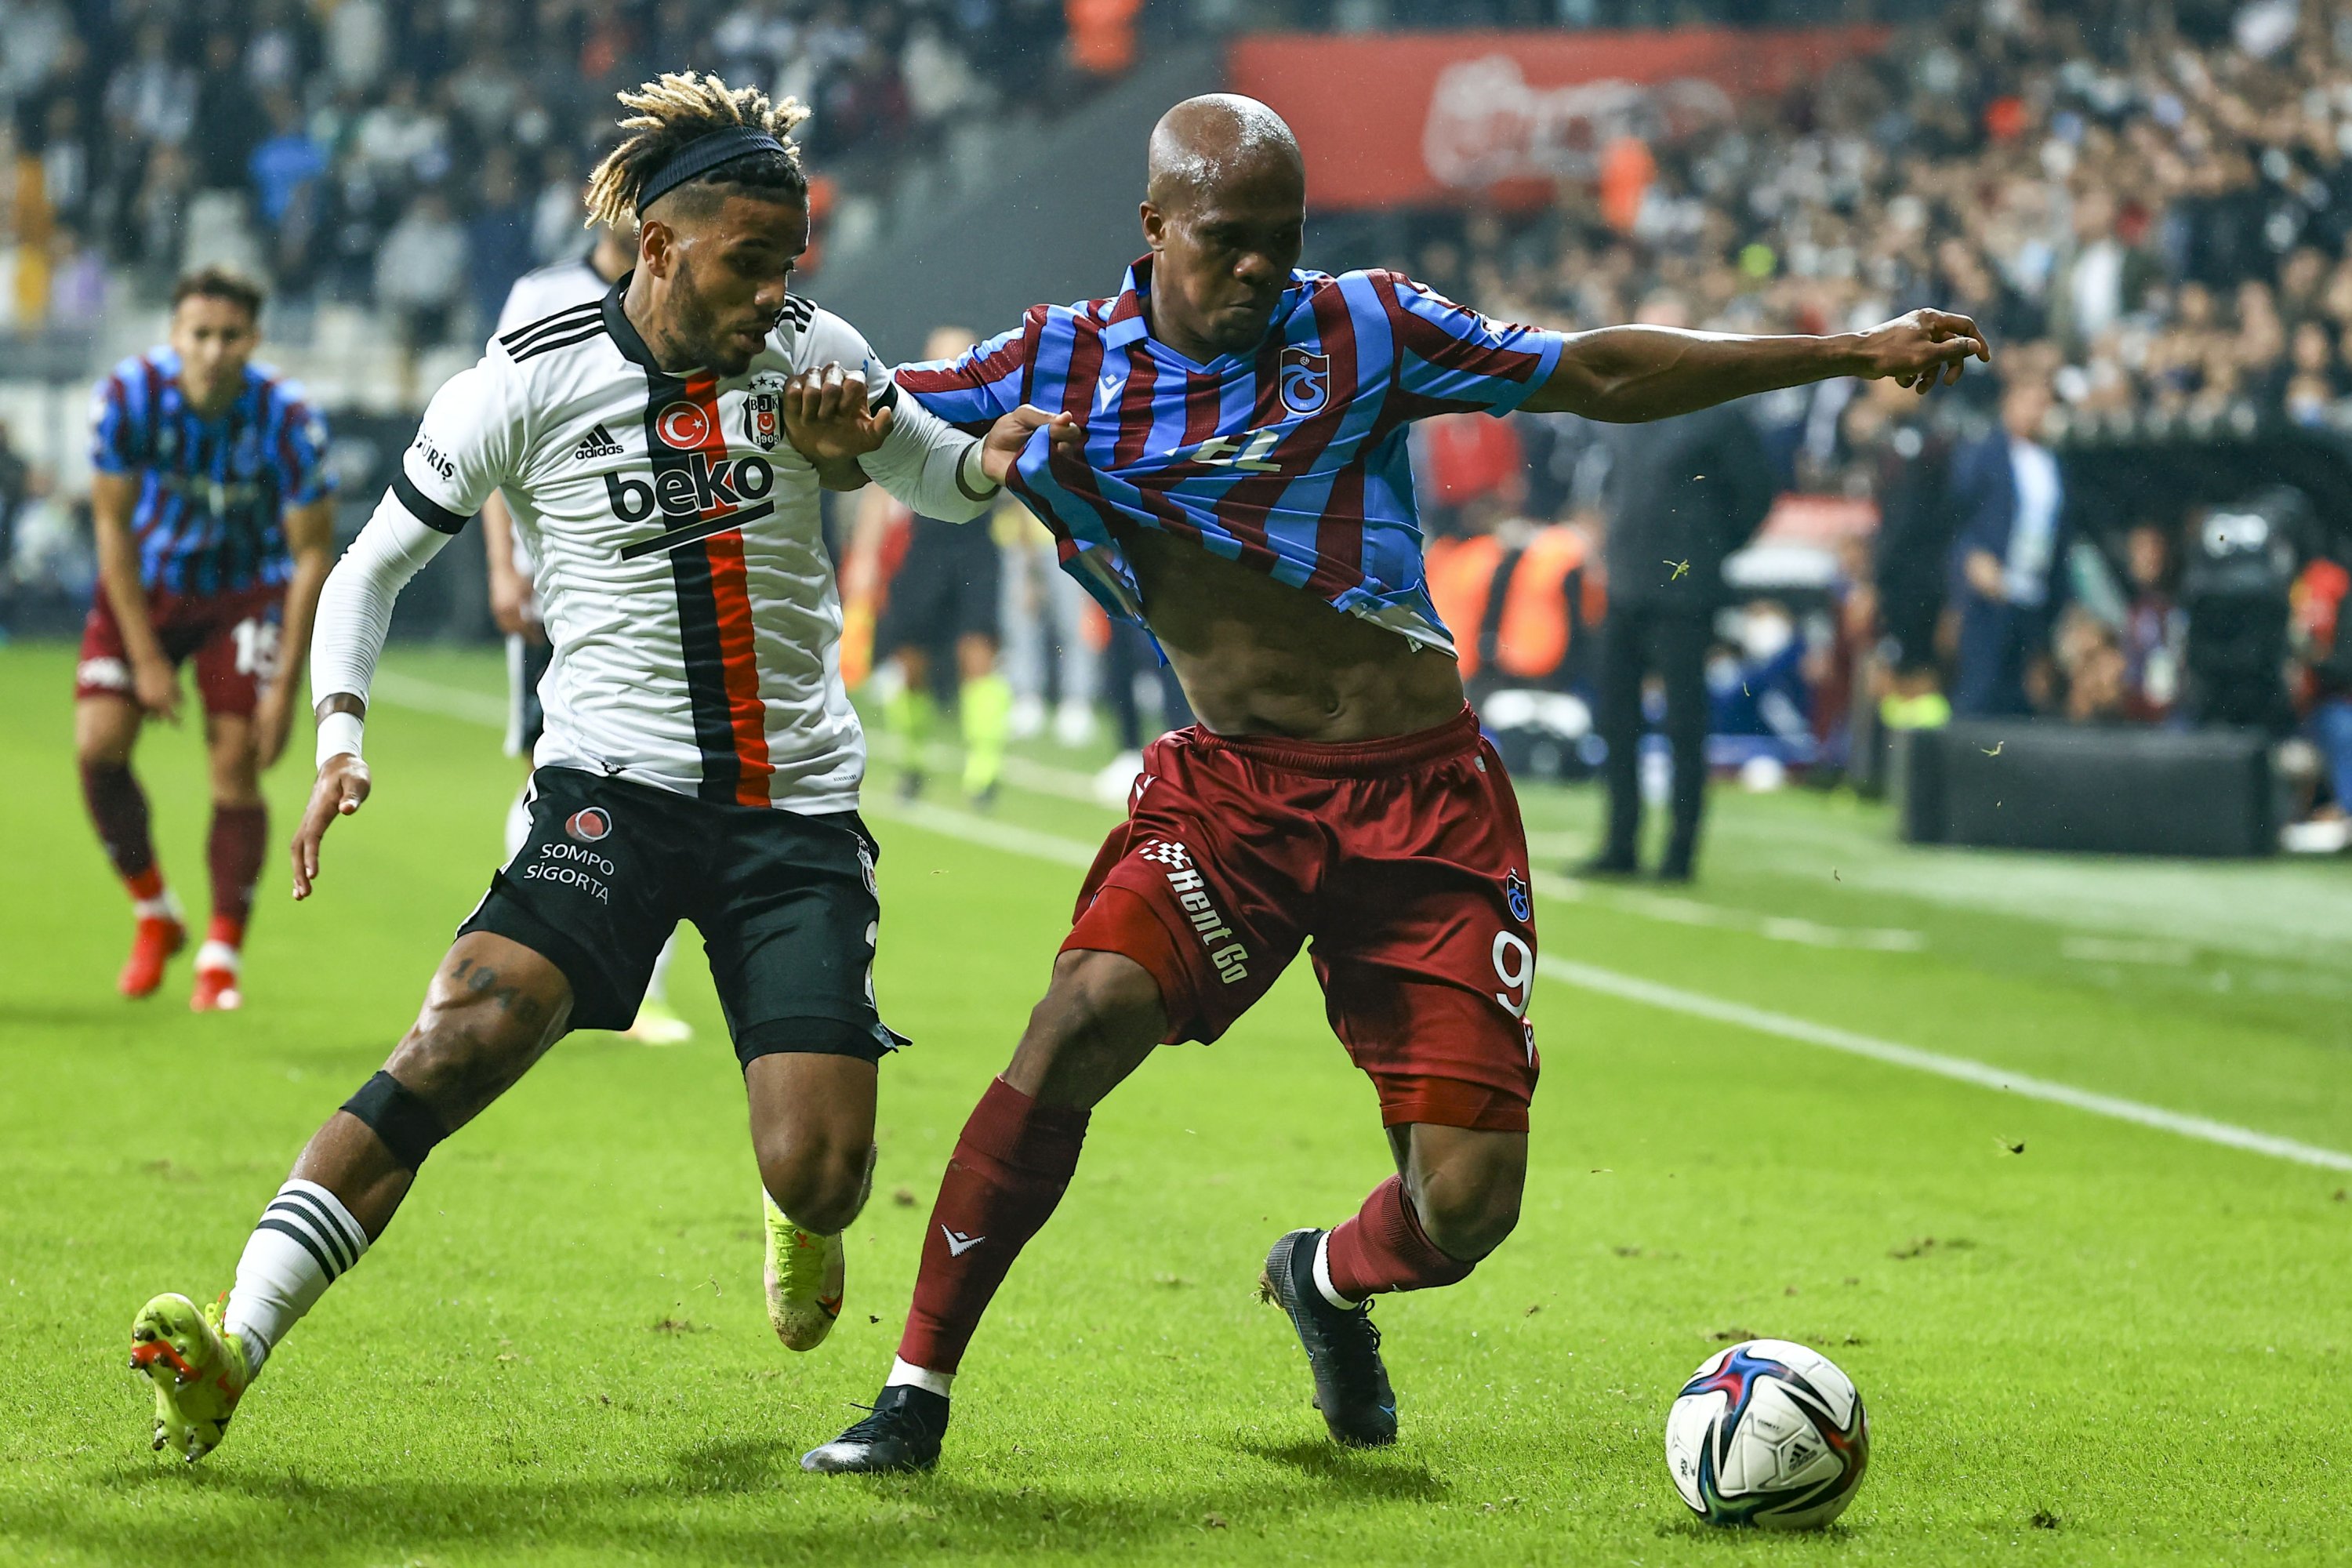 Beşiktaş's Valentin Rosier (L) vies for the ball with Trabzonspor's Anthony Nwakaeme during a Süper Lig match in Istanbul, Turkey, Nov. 6, 2021. (AA Photo)